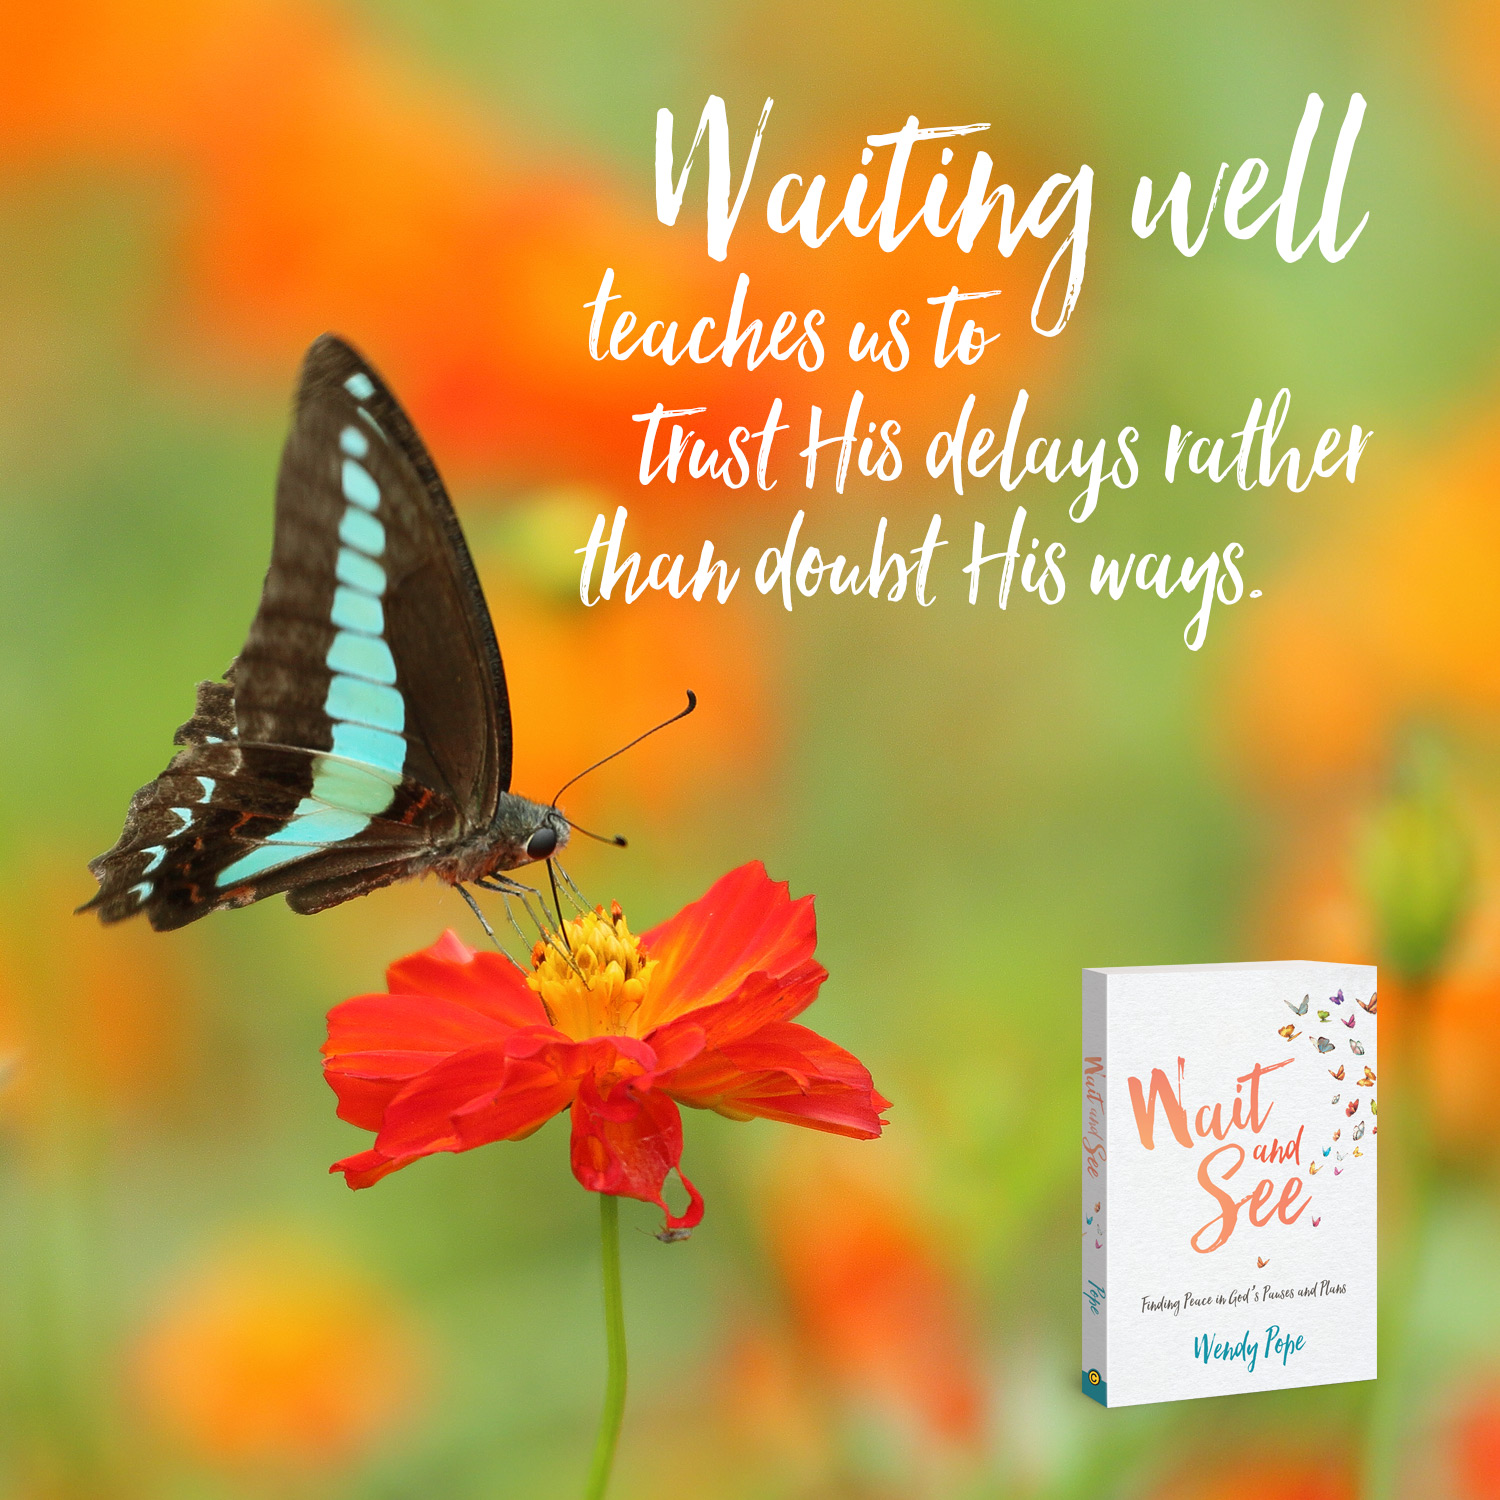 Waiting well teaches us to trust his delays rather than doubt his ways.